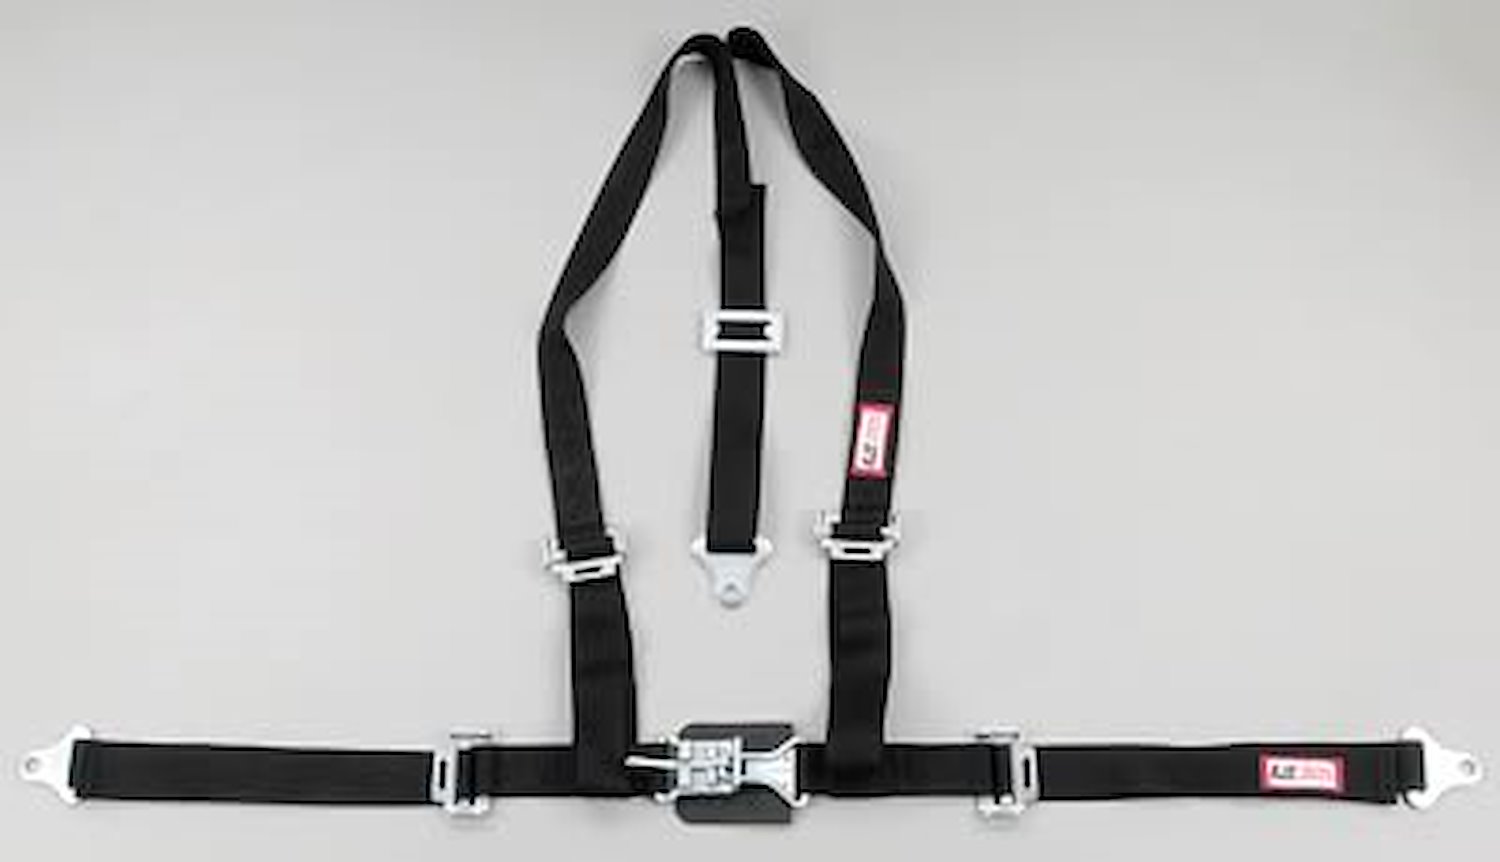 NON-SFI L&L HARNESS 2 PULL DOWN Lap Belt SNAP SEWN IN 2 S.H. Y FLOOR Mount WRAP/BOLT GRAY